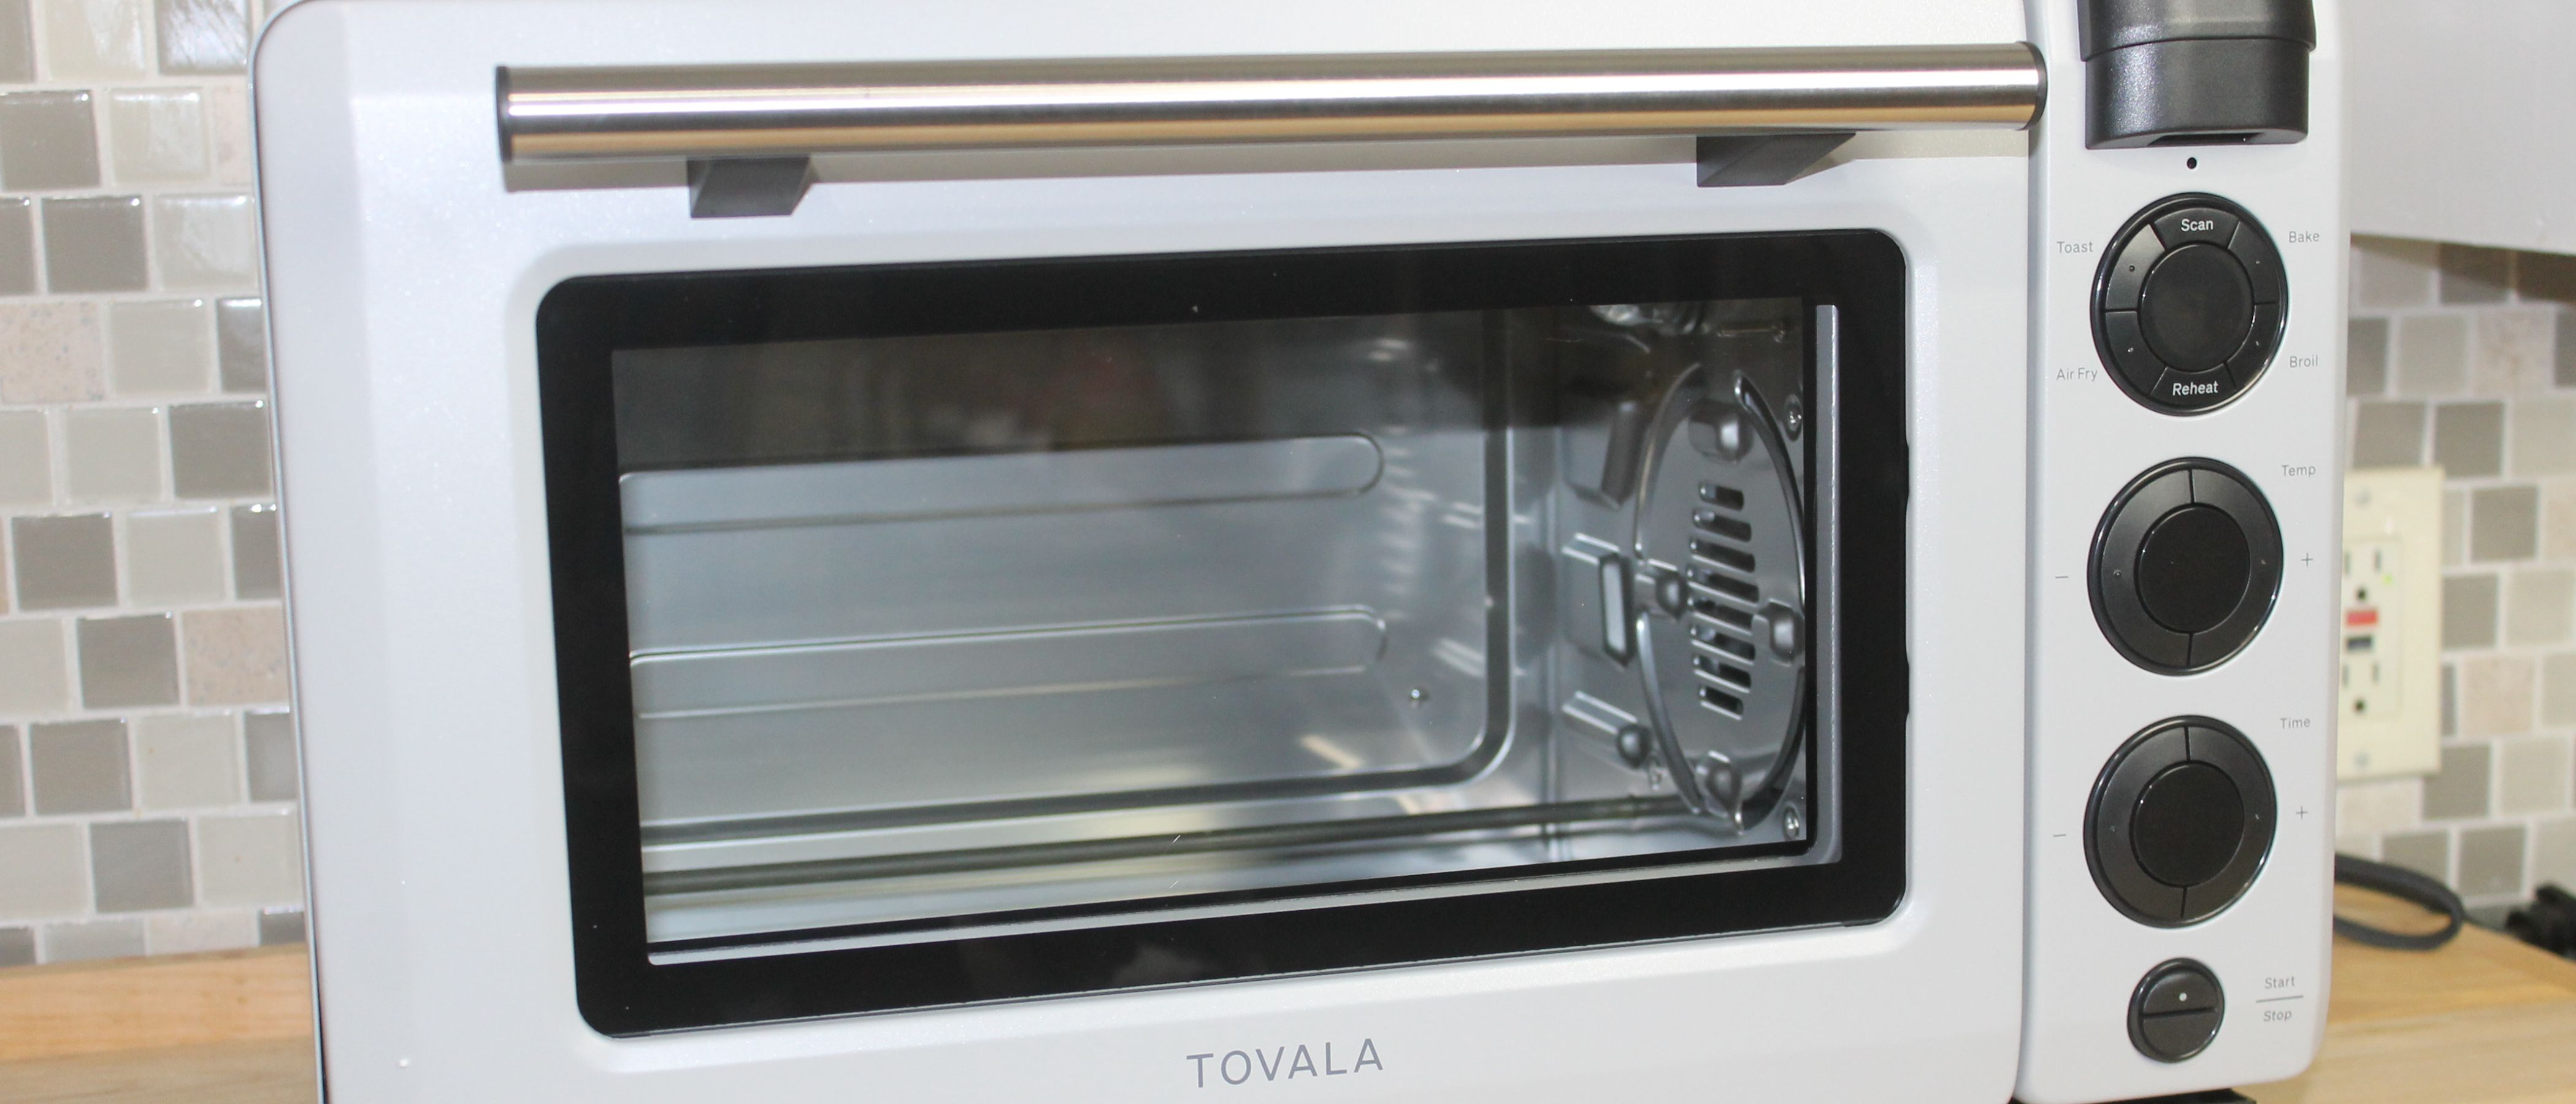 I Tried Cooking Steaks In The Tovala Smart Oven And This Happened 